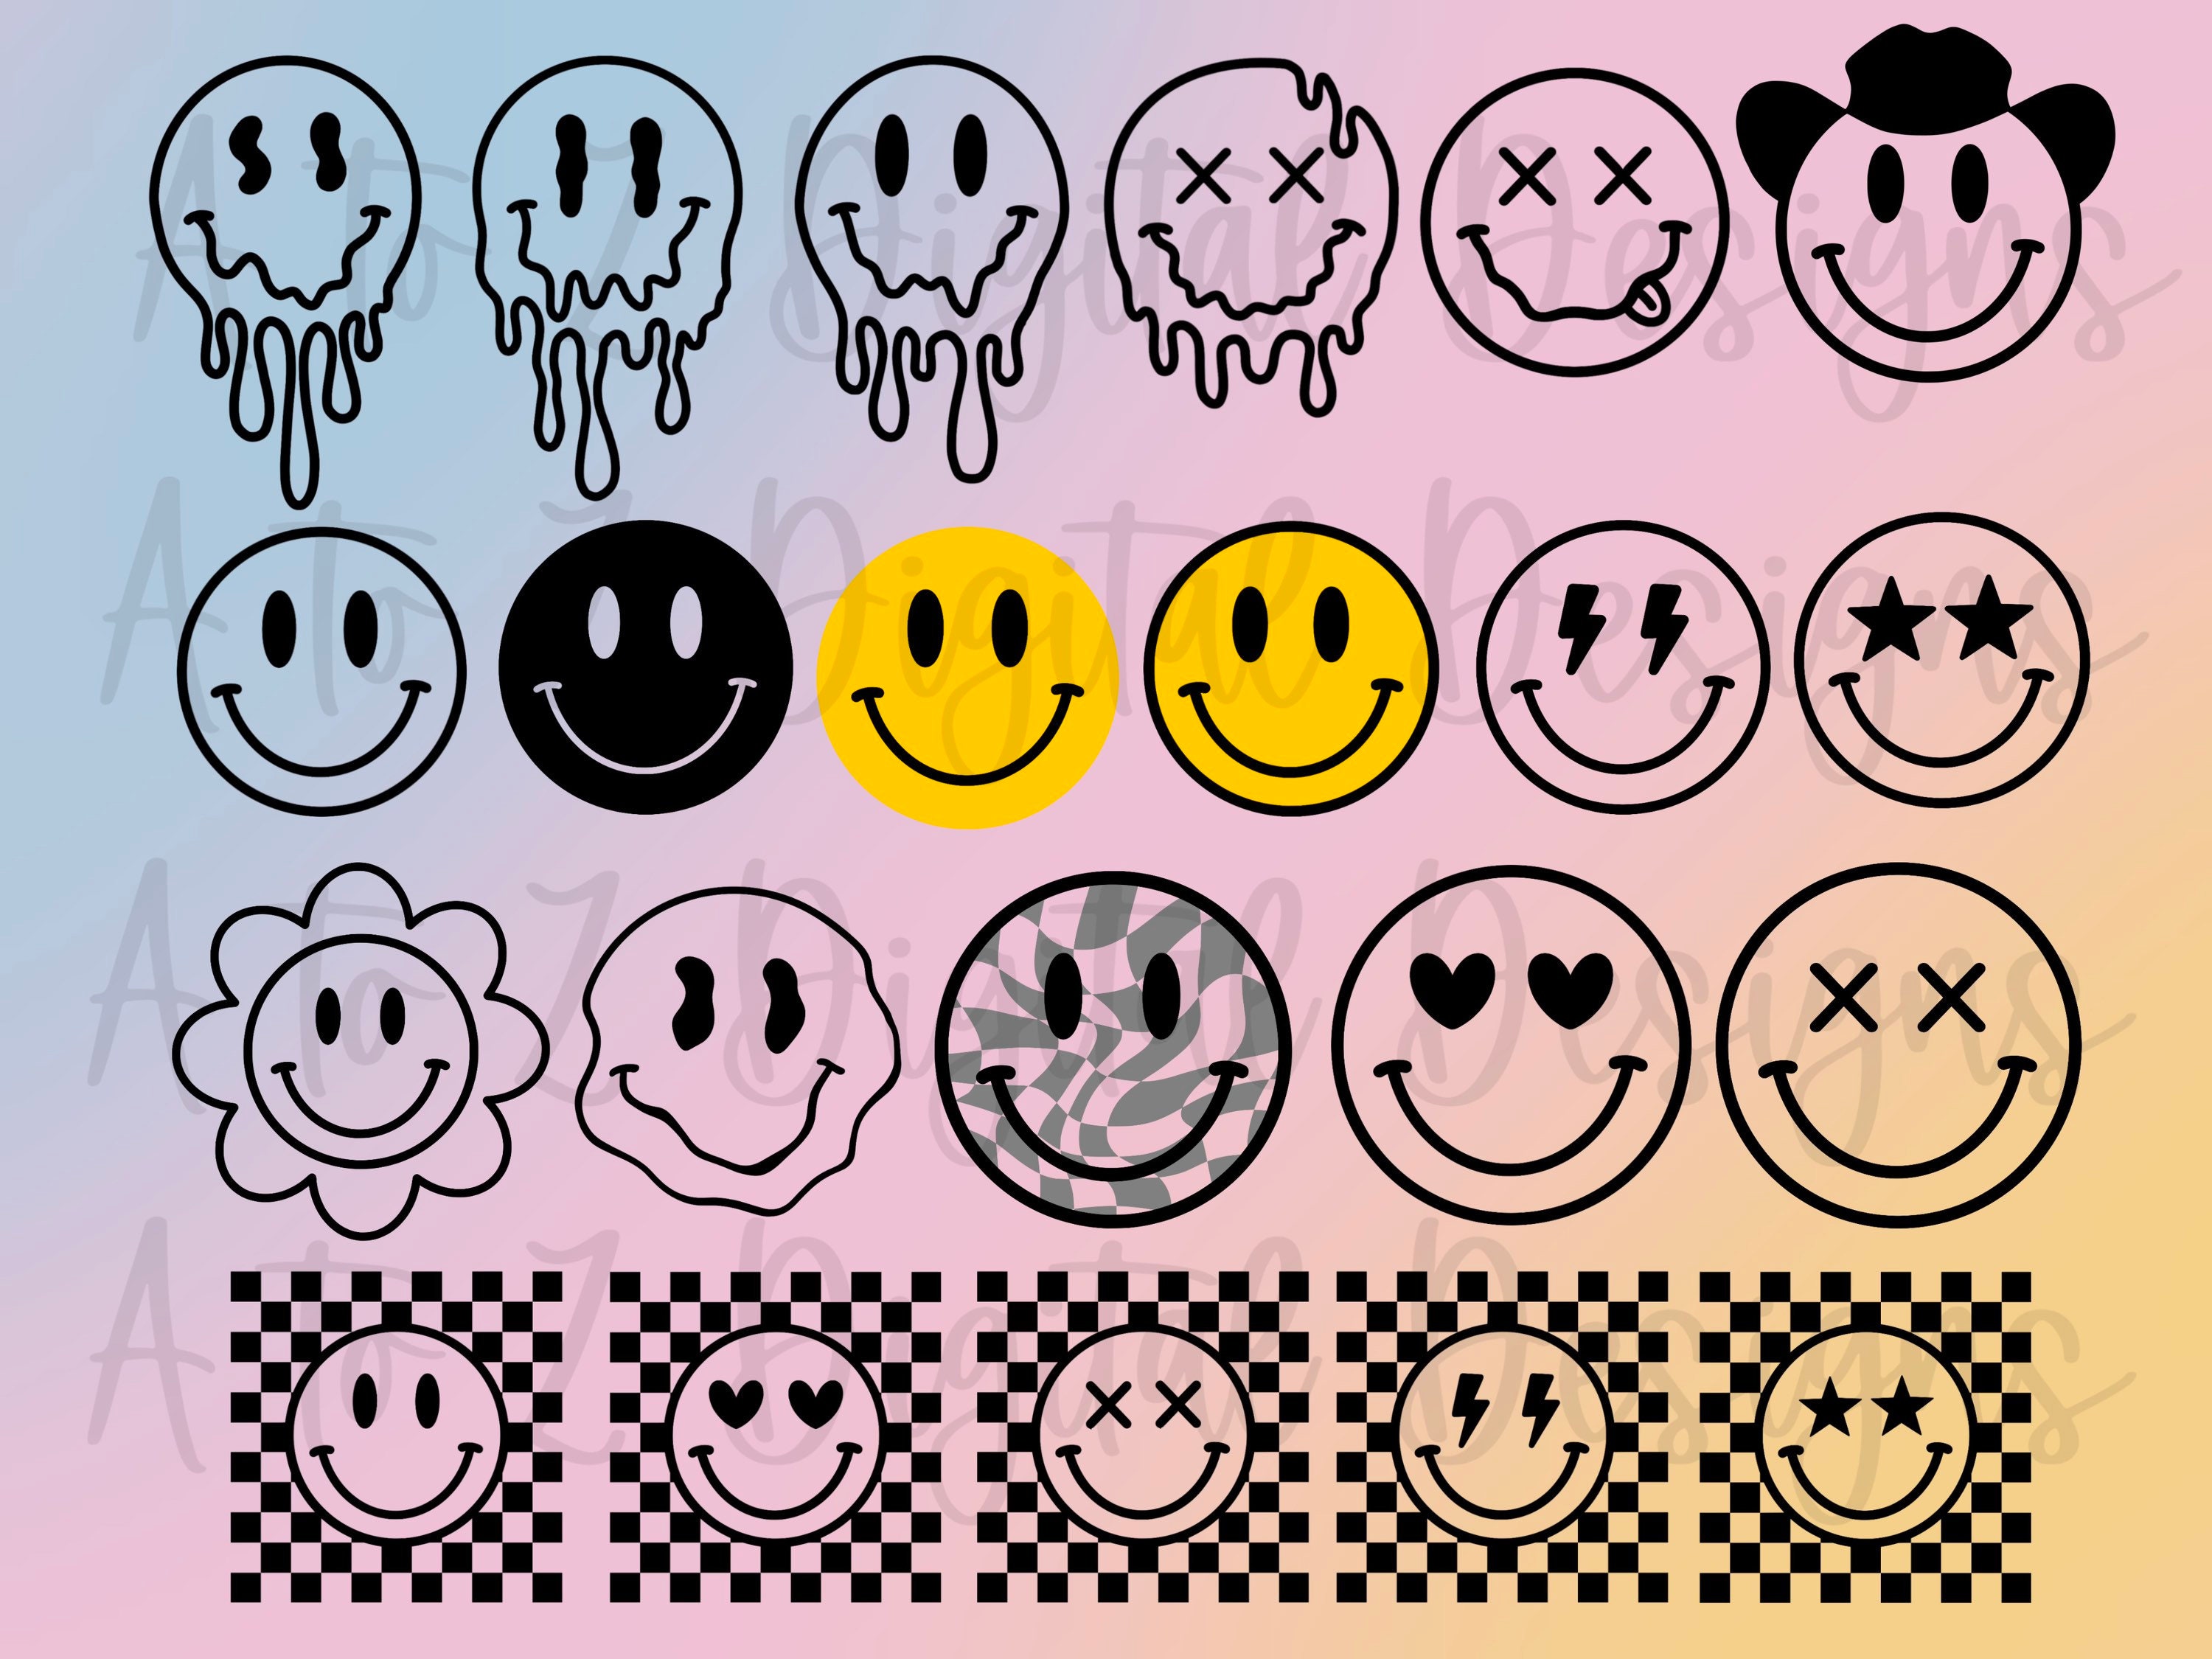 Japanese Smiley Face ジ 𝓬𝓸𝓹𝔂 𝖆𝖓𝖉 𝓹𝓪𝓼𝓽𝓮 